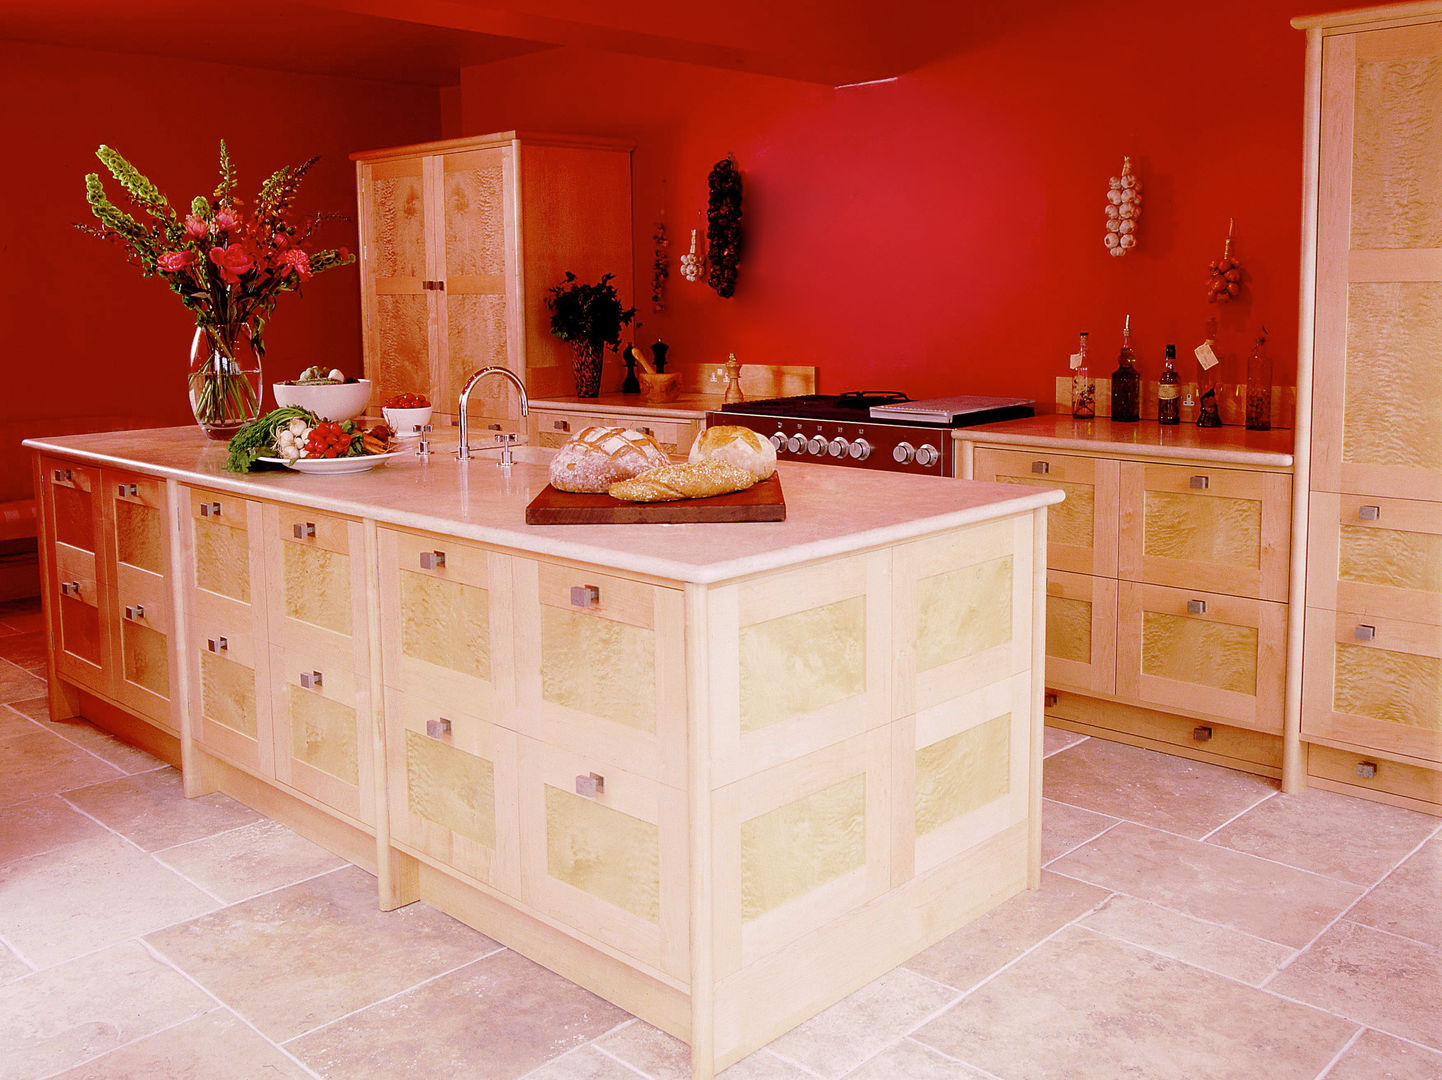 Quilted Maple Kitchen with Red Wall designed and made by Tim Wood Tim Wood Limited Nowoczesna kuchnia Szafki i regały